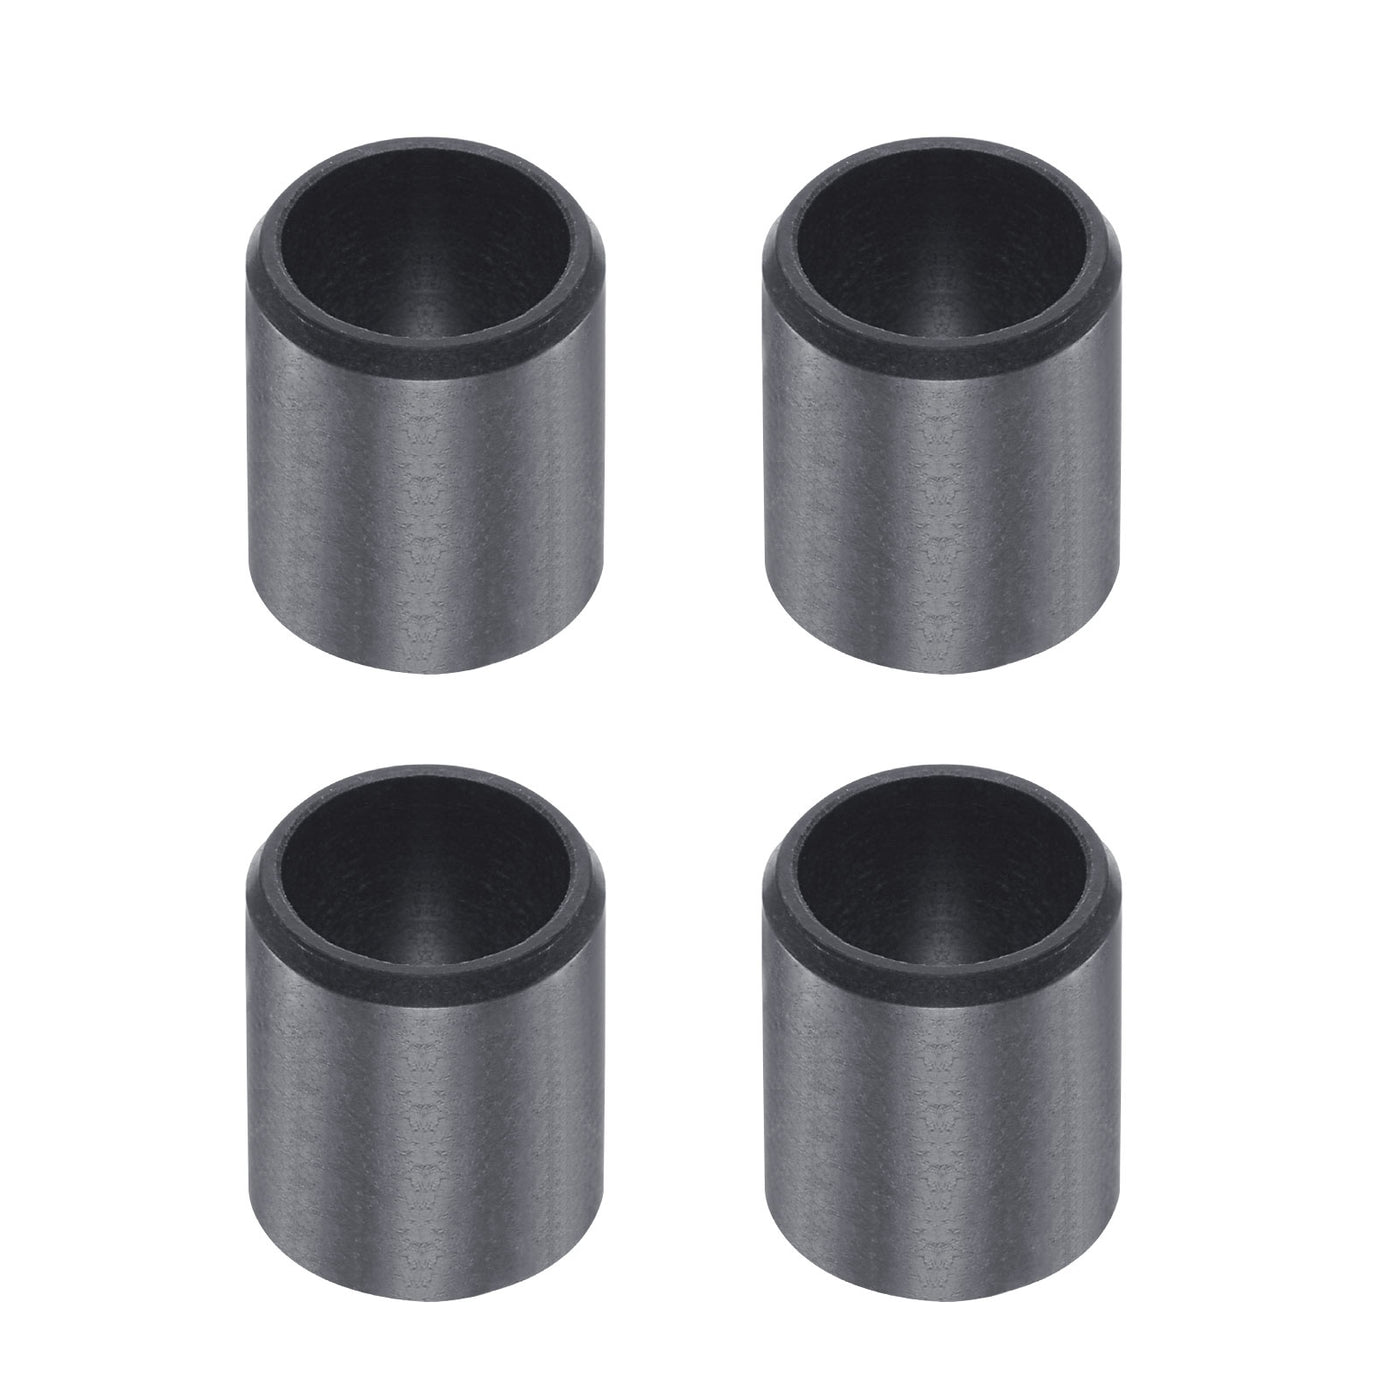 uxcell Uxcell Sleeve Bearings 8mmx10mmx15mm POM Wrapped Oilless Bushings Black 4pcs